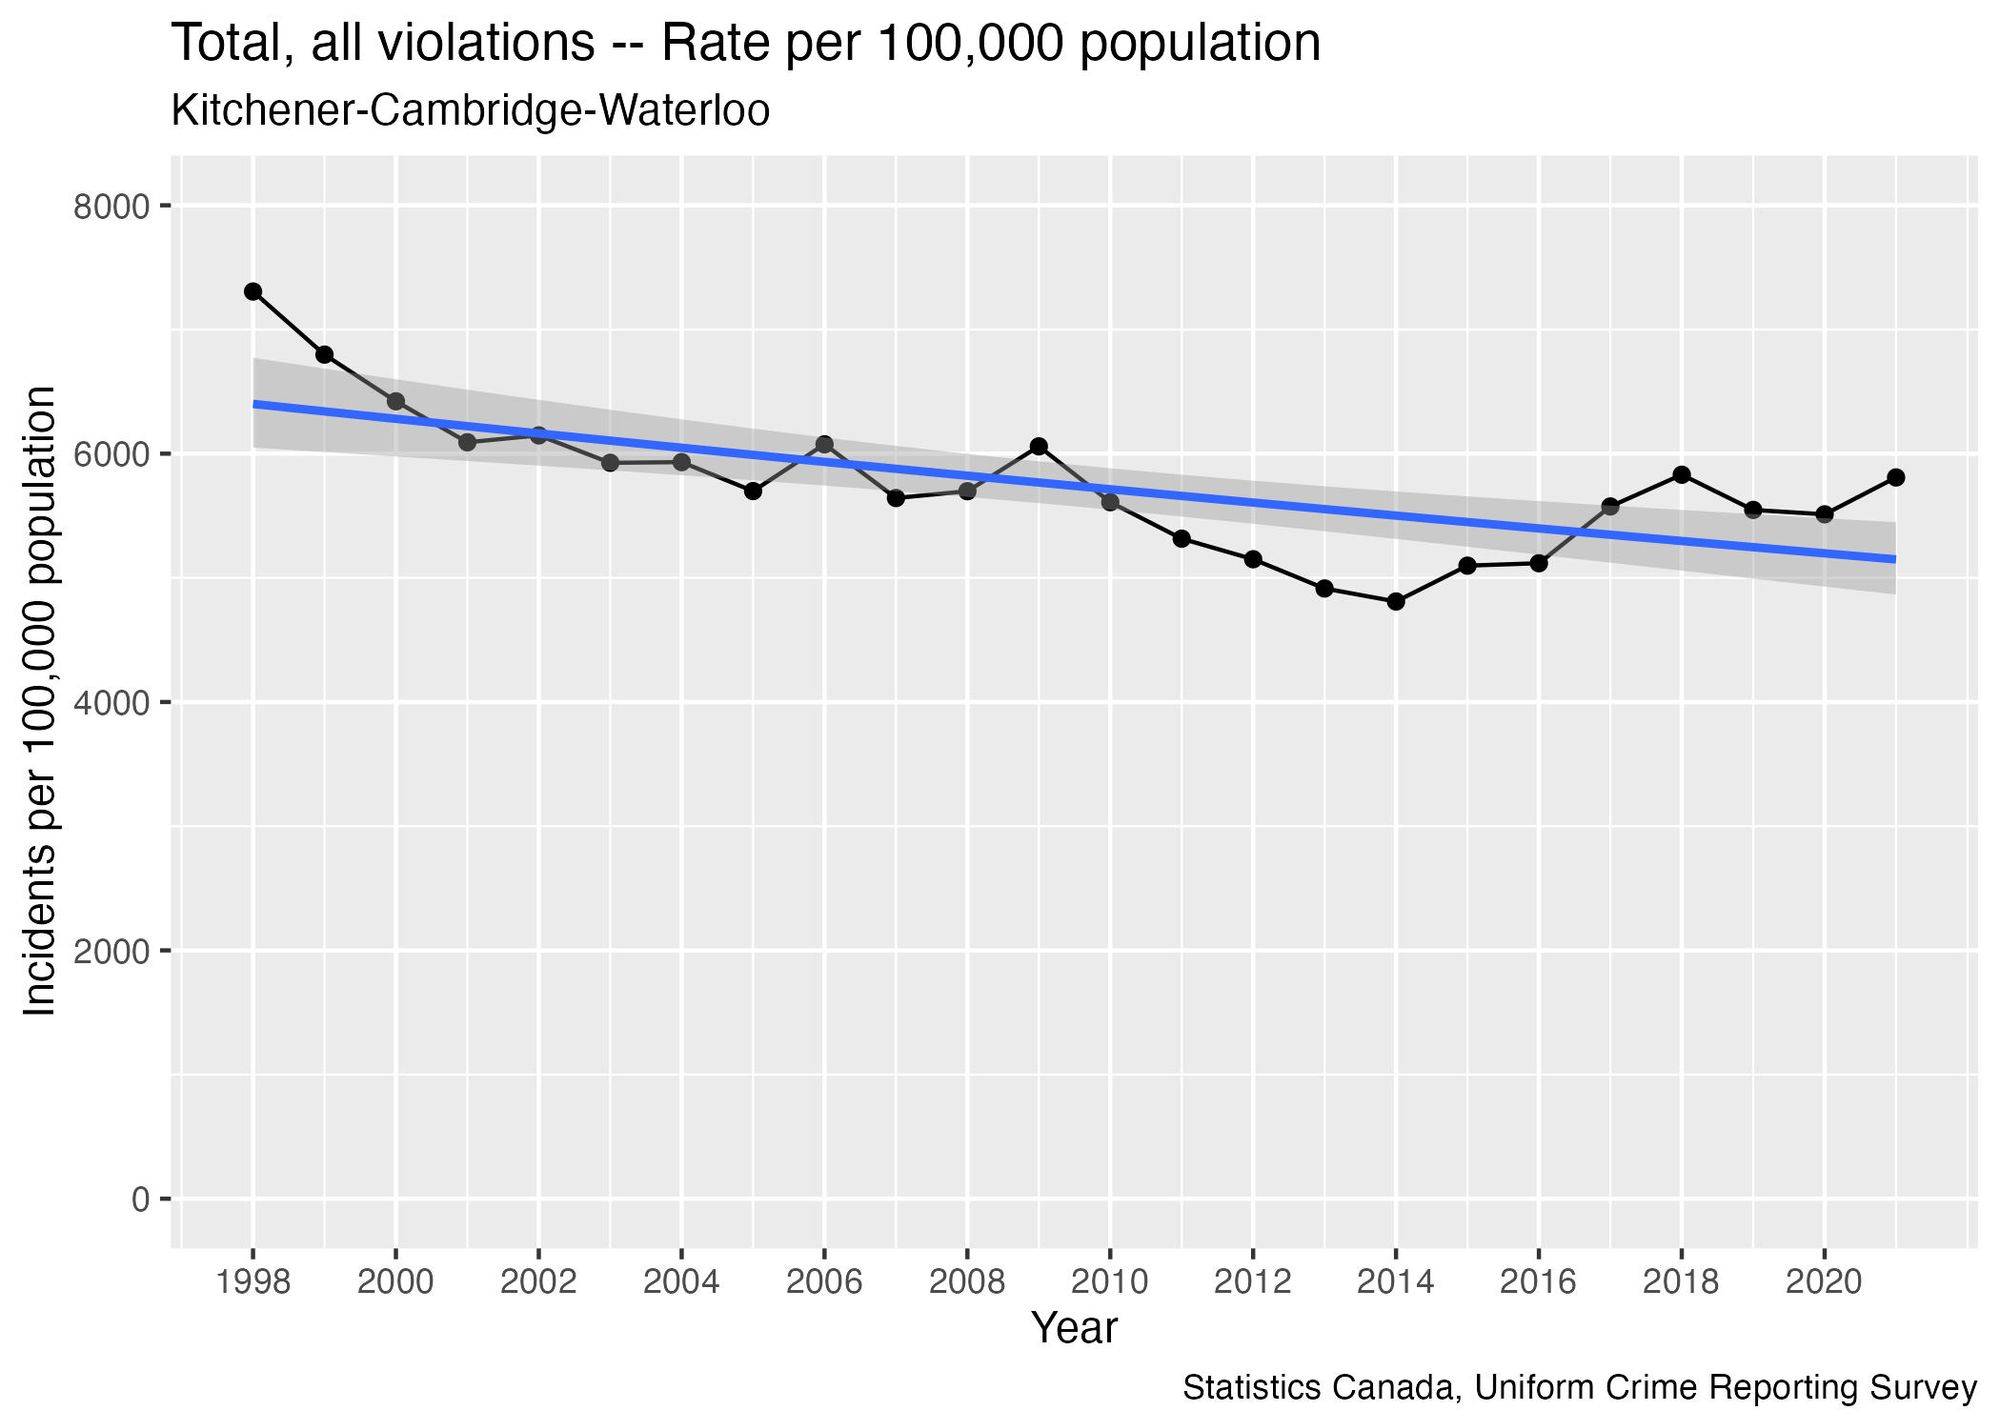 A graph of "Total, all violations - rate per 100,000 population" for Kitchener-Cambridge-Waterloo. The graph starts in 1998, when the rate is just above 7000. The graph reaches a low point in 2014, around a rate of 5000, and then increases again reaching a rate just below 6000 in 2021. A trend line has been added to the graph, with a slight decreasing slope.